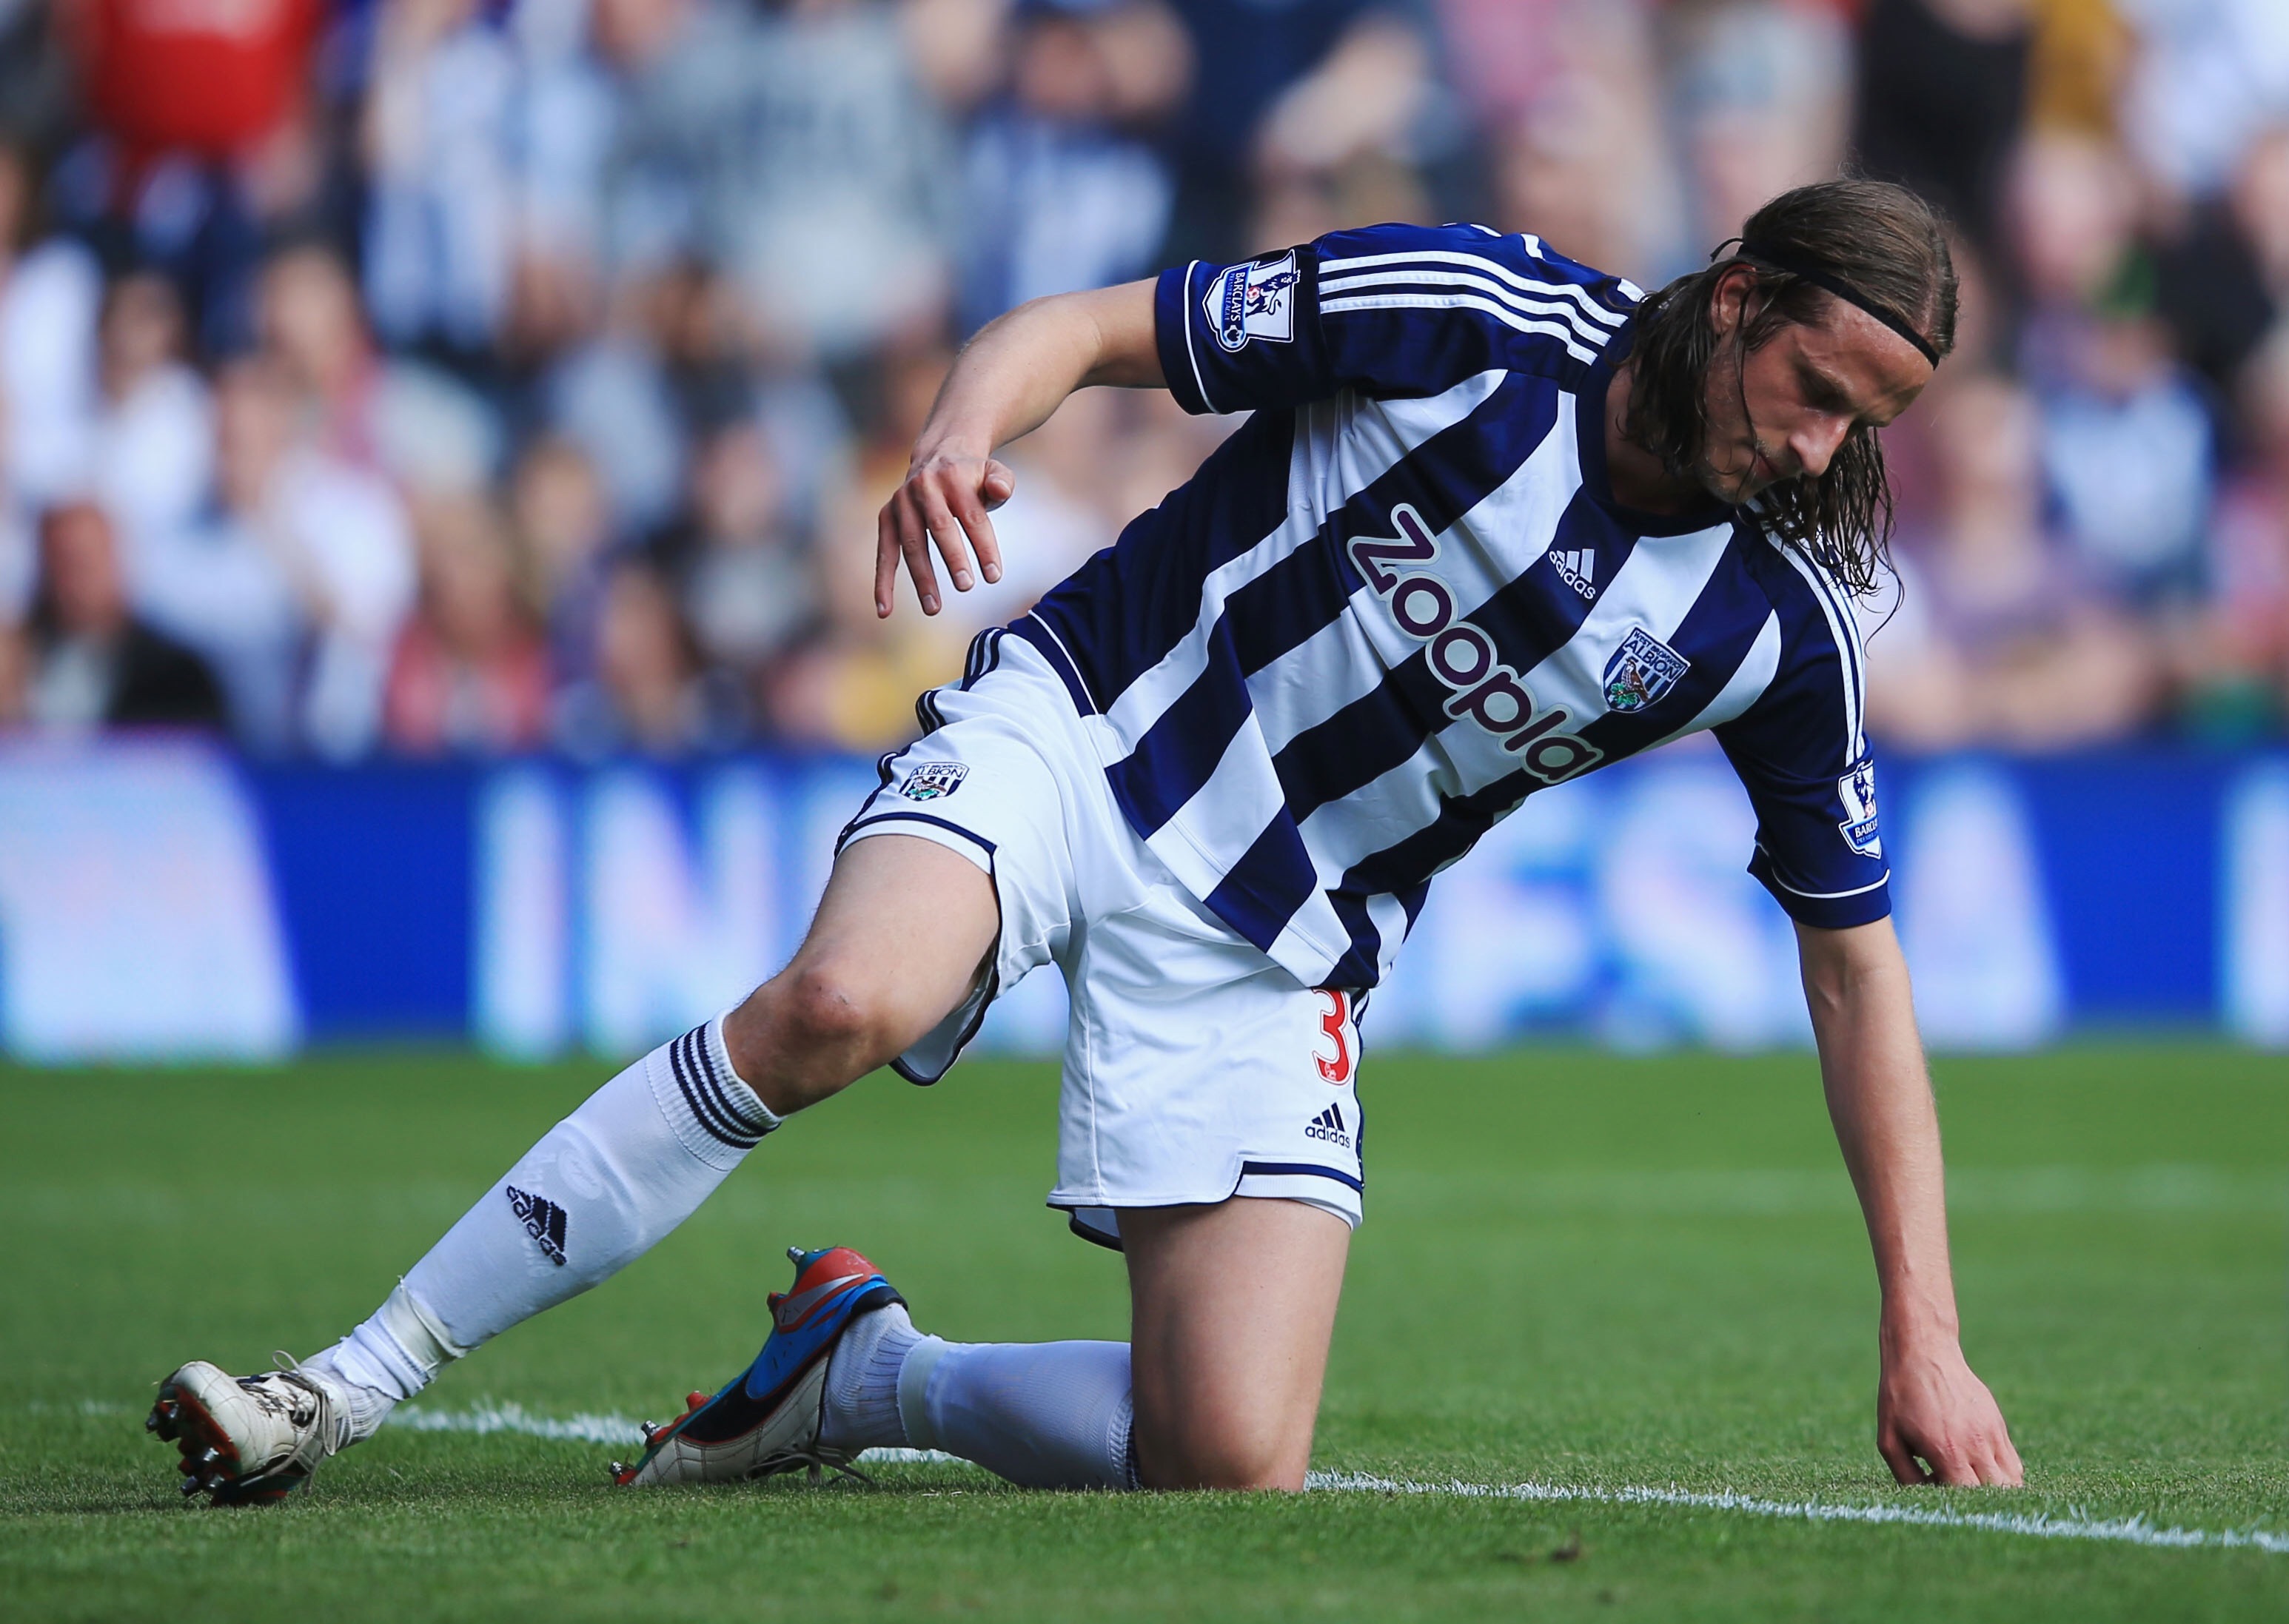 Jonas Olsson goal gives West Brom shock win at Manchester United